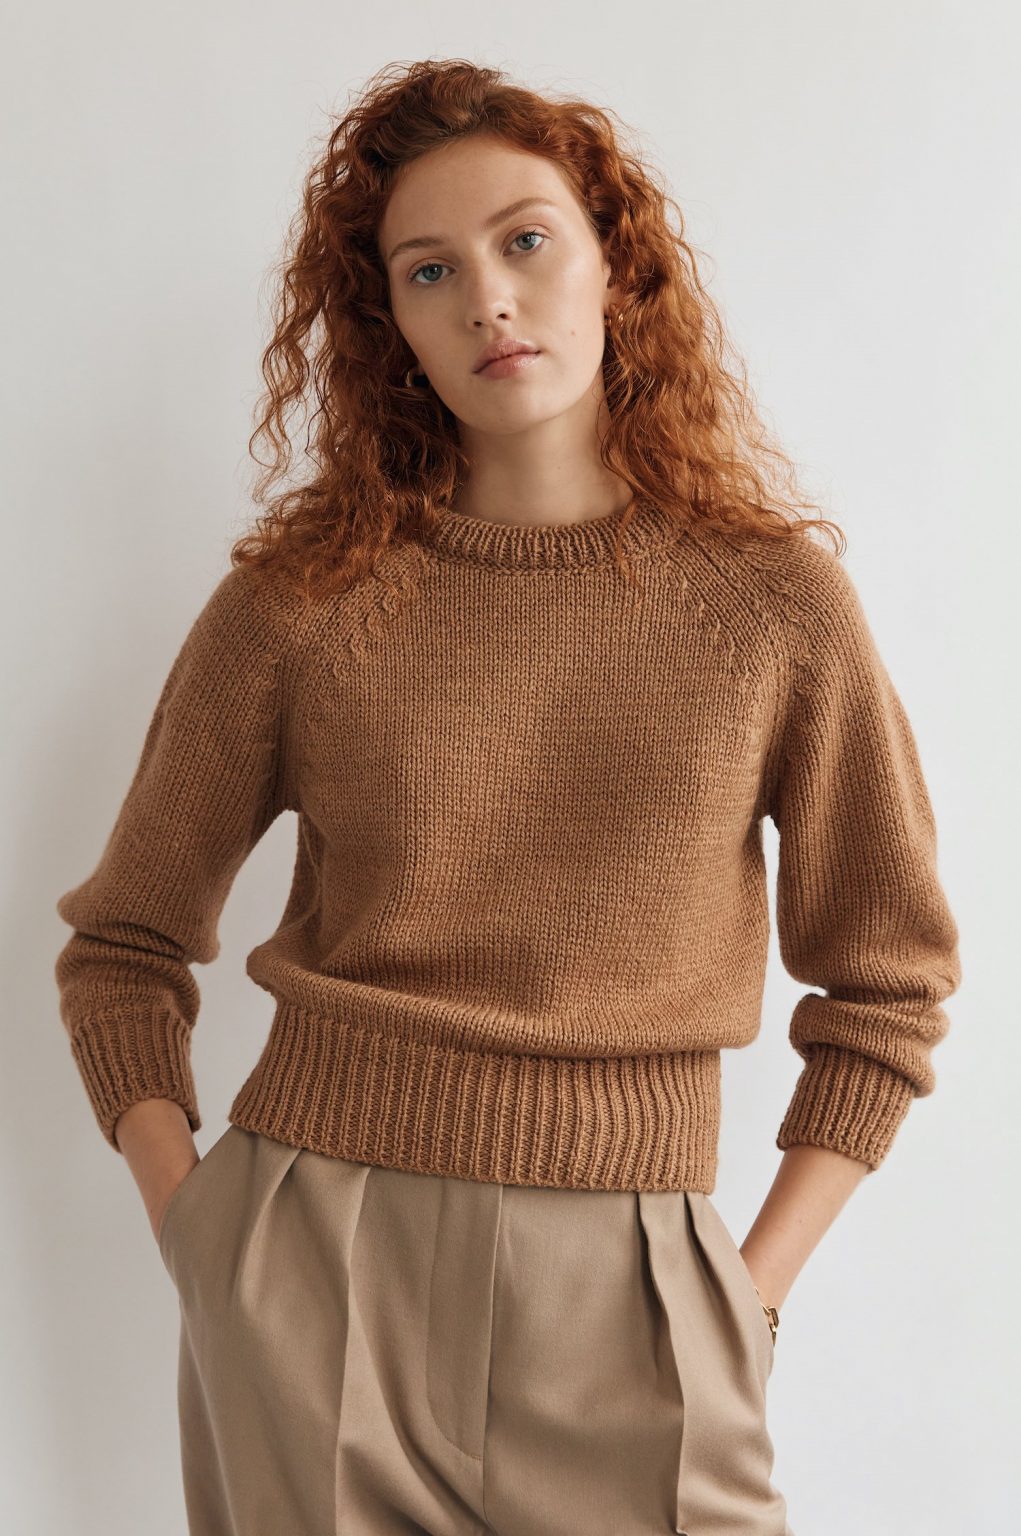 Jumpers in May (and four of the best sustainable knitwear brands ...